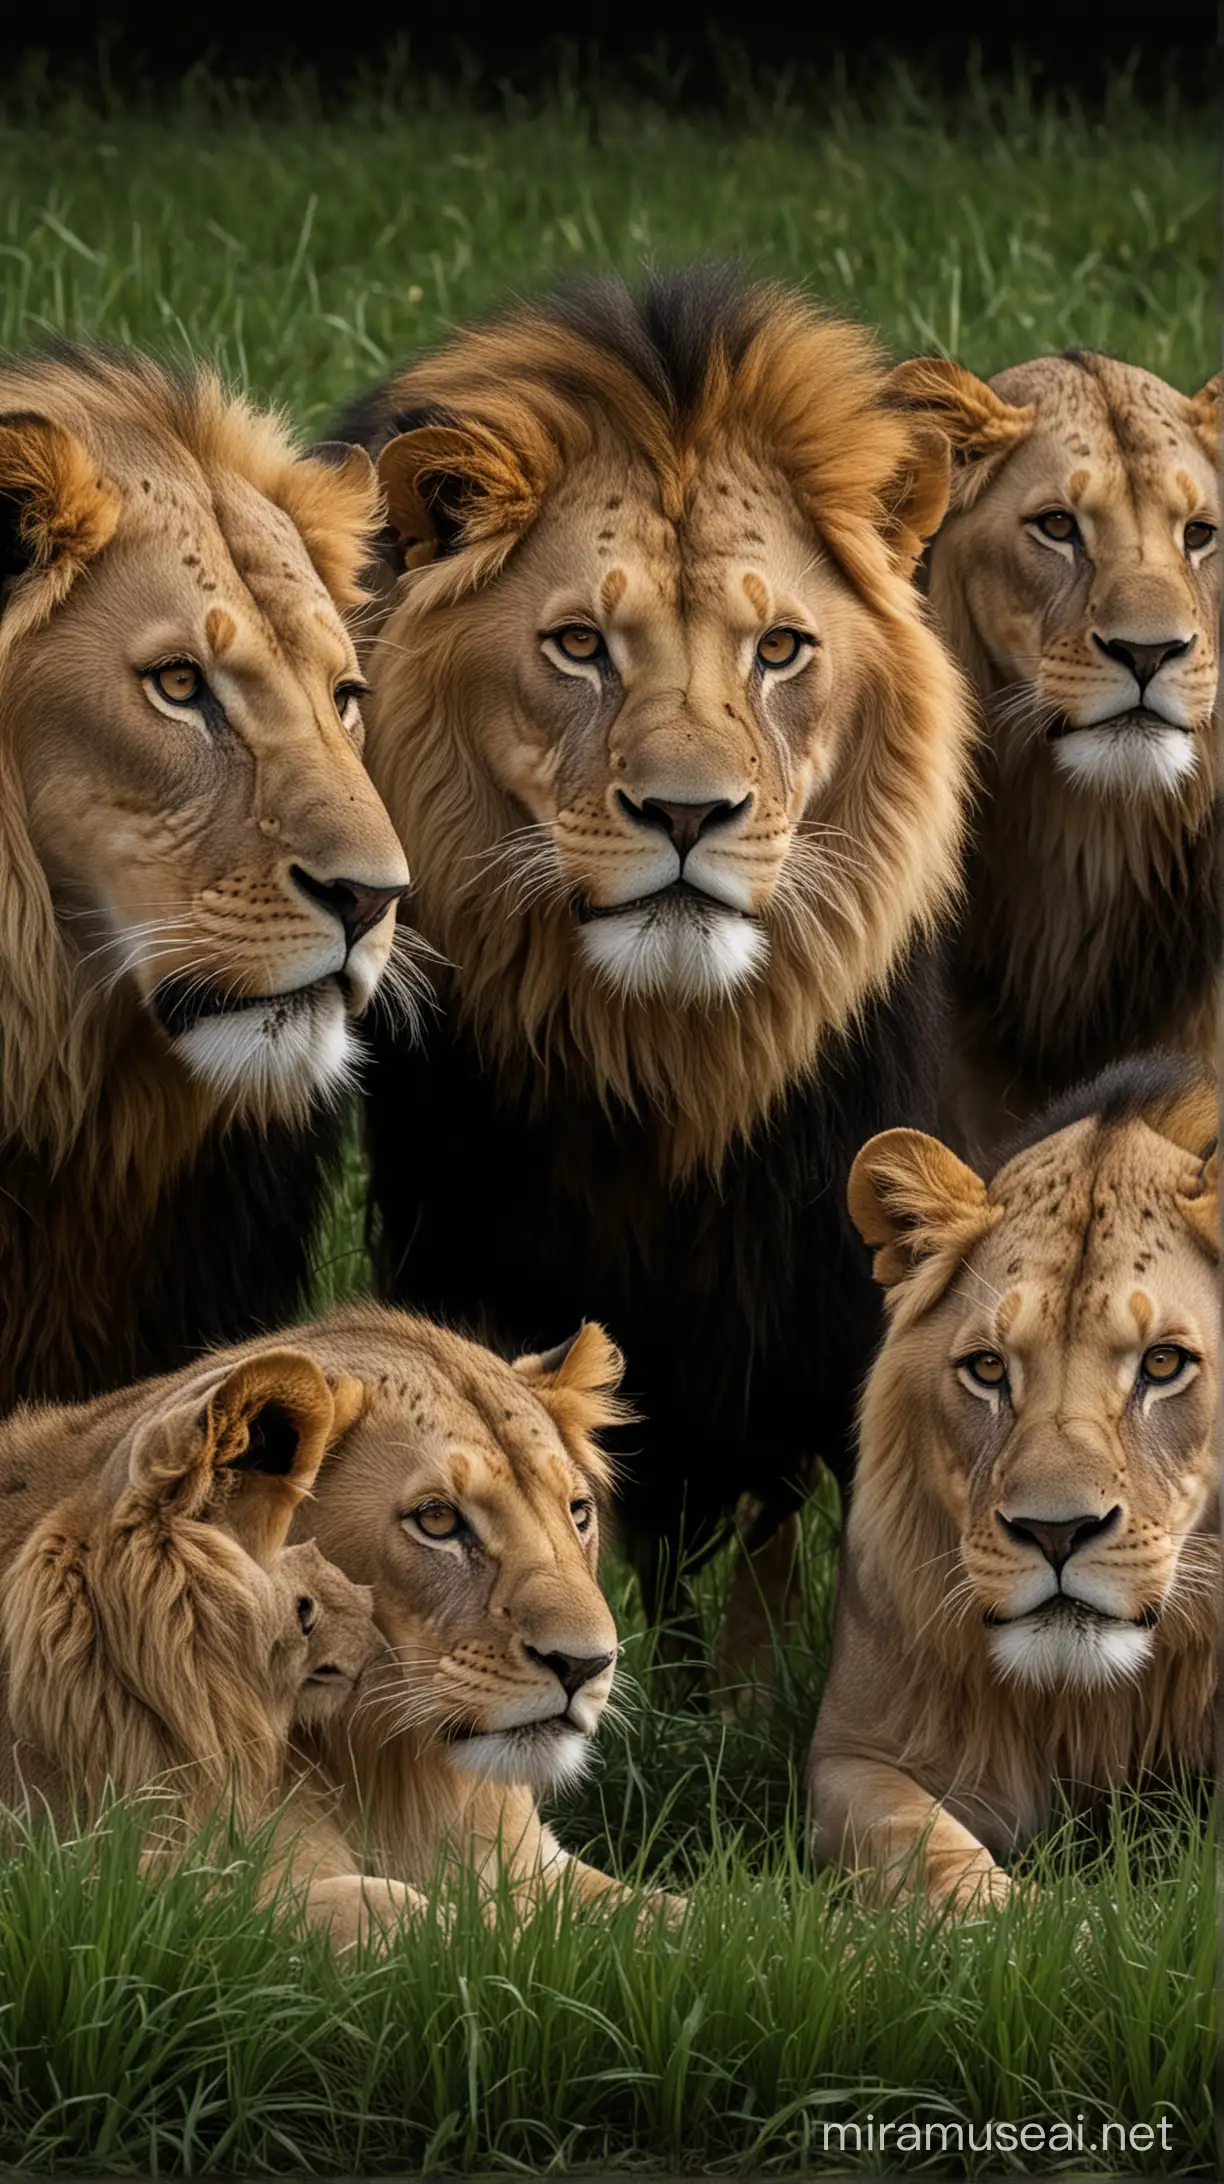 multiple lions in grass with a black background